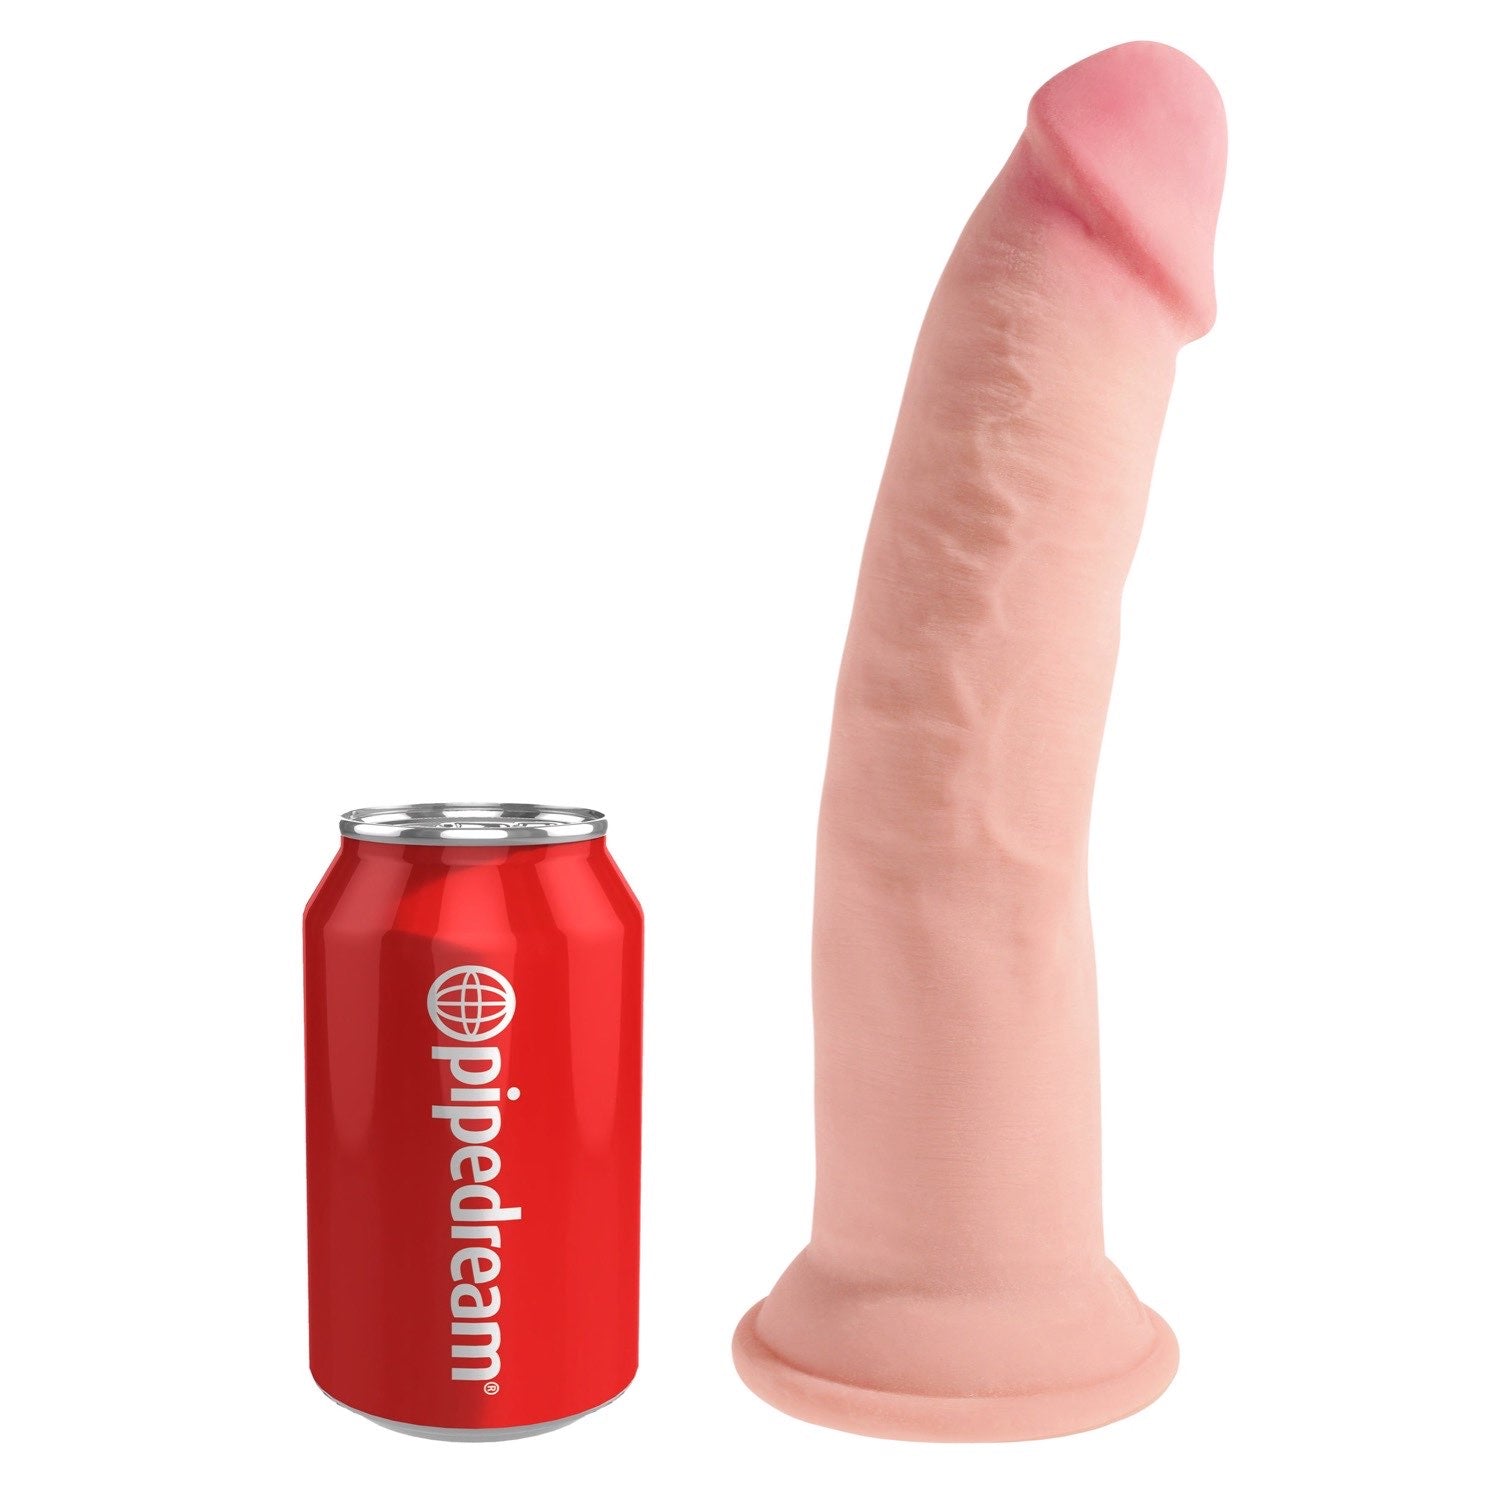 King Cock Plus 9&quot; Triple Density Cock - Flesh 22.9 cm Dong by Pipedream